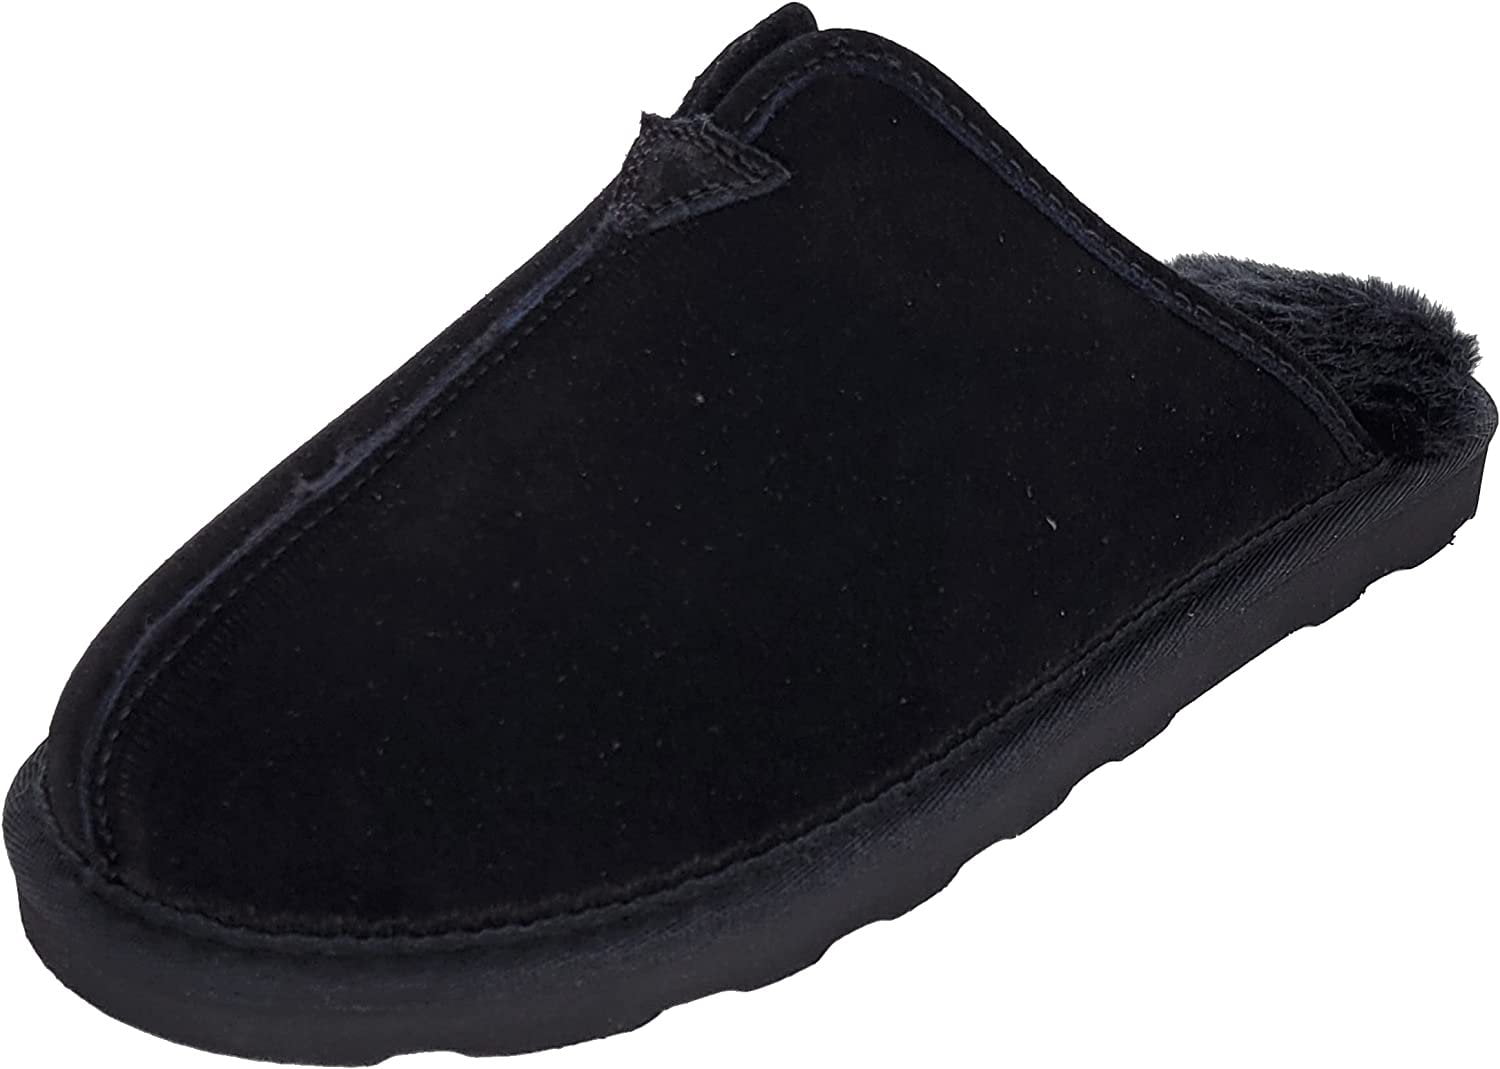 Clarks Mens Open Back Suede Leather Slipper - Plush Faux Fur Lining ...